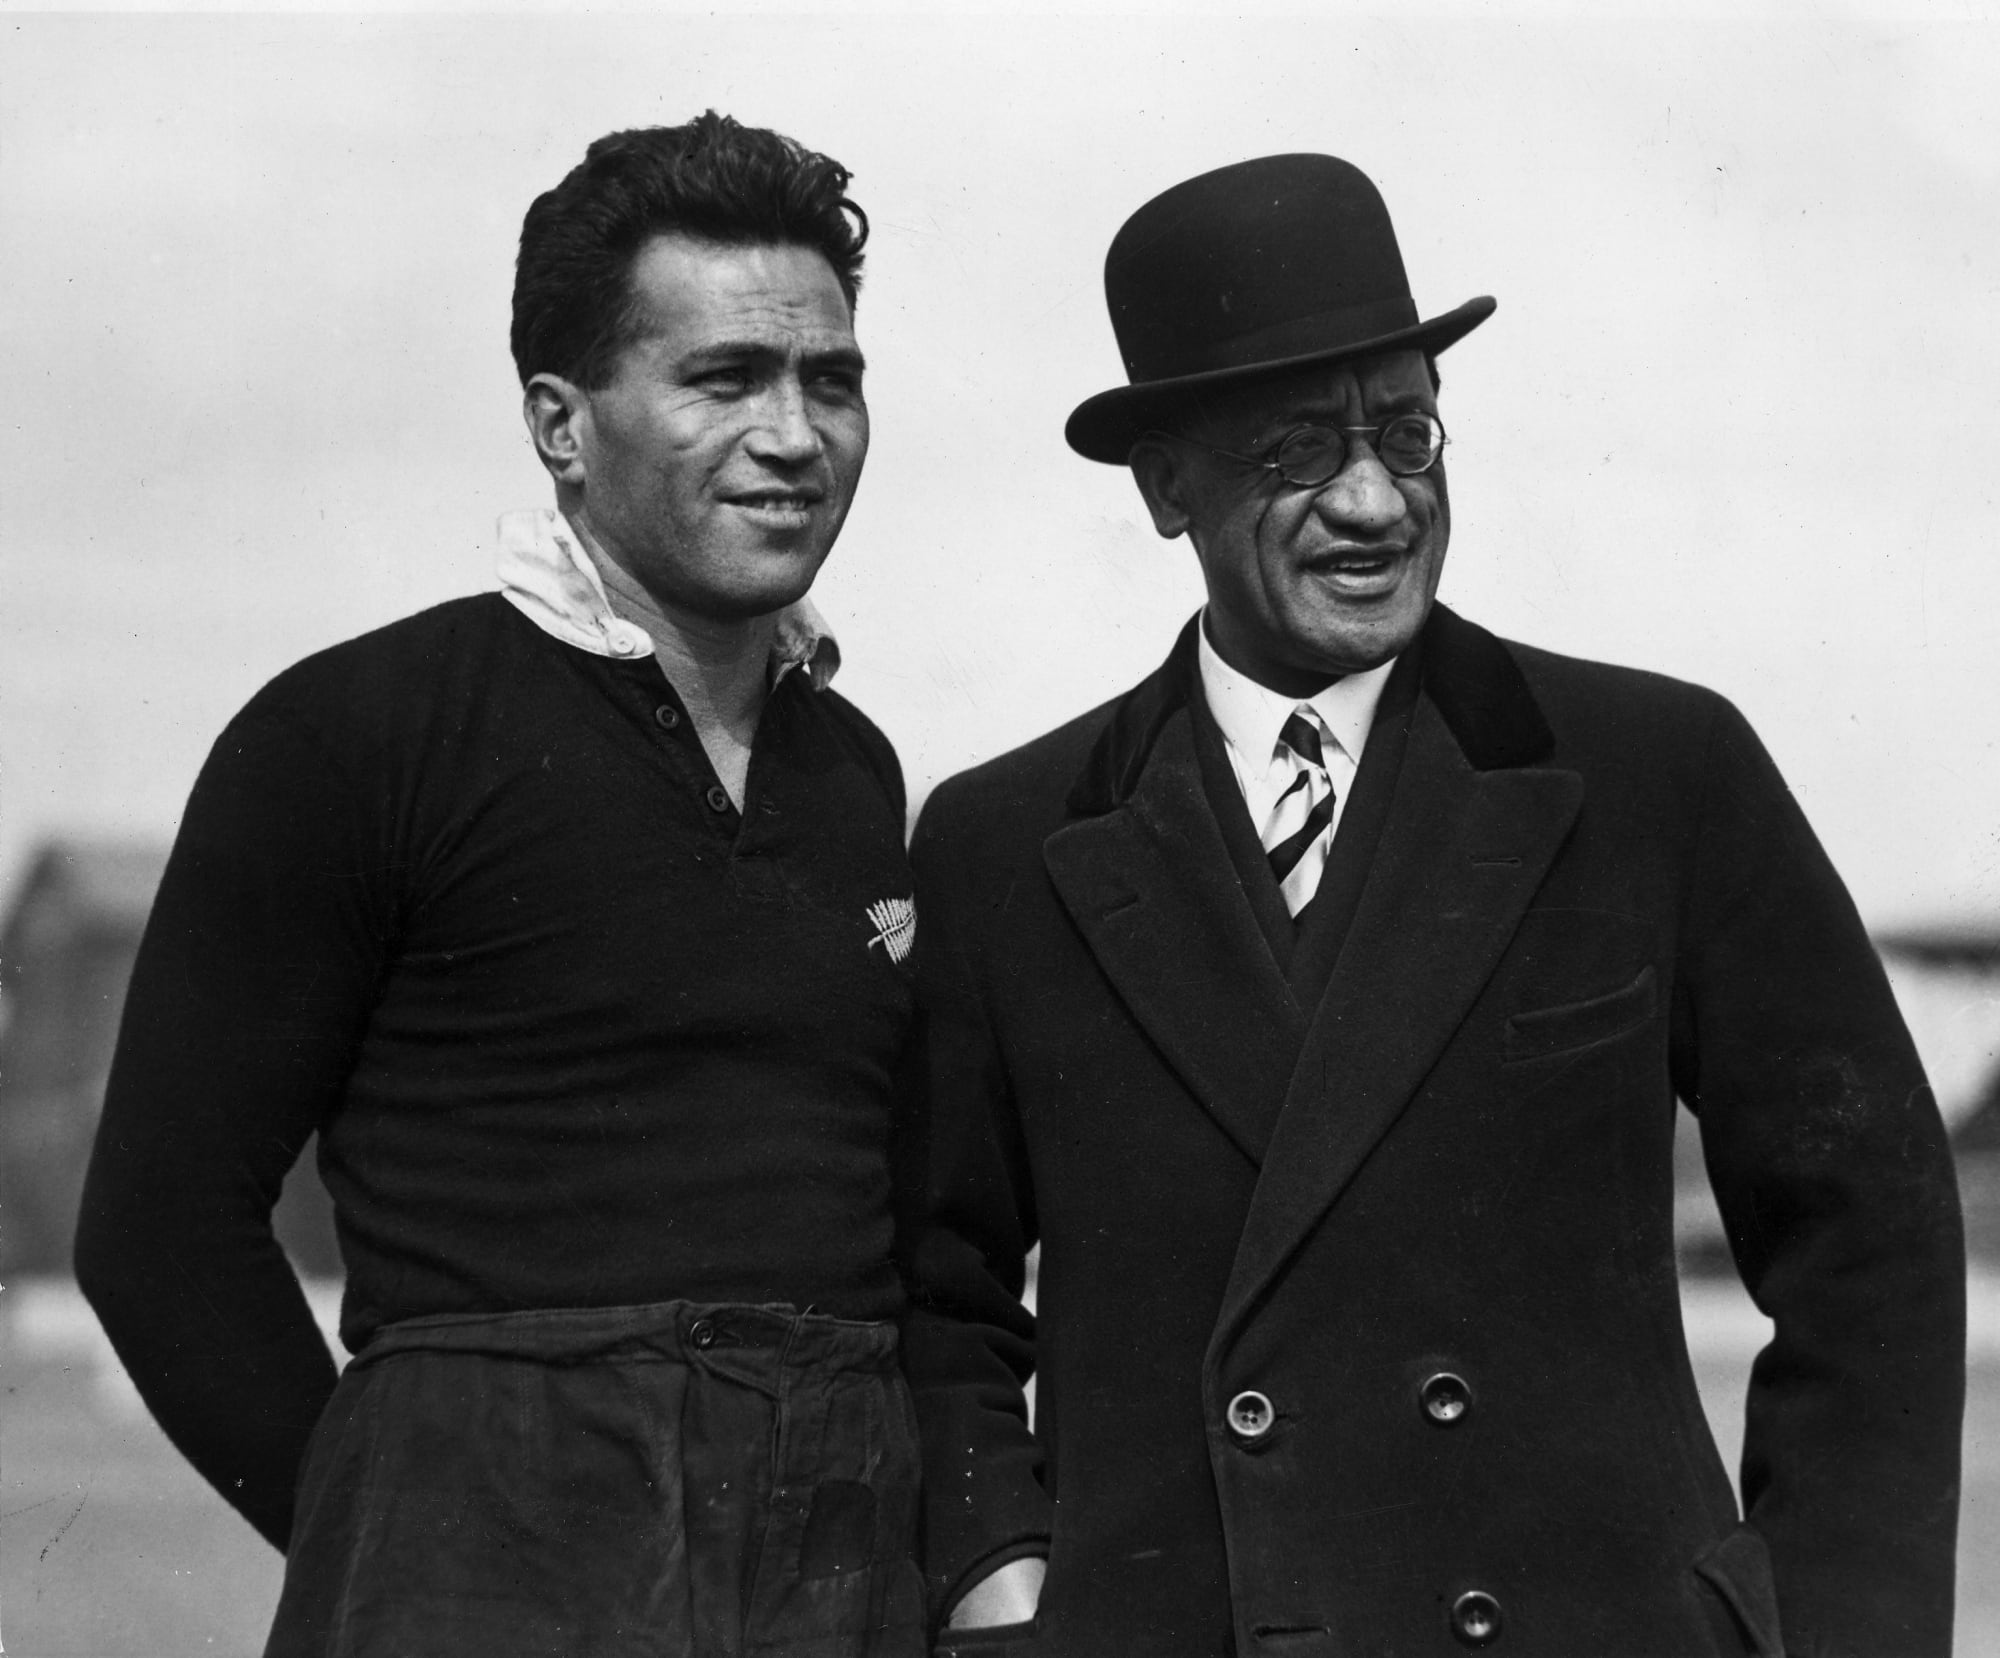 George Nepia had a career in both rugby and league. He captained the New Zealand Maori team that toured Australia in 1935. Here he is photographed with team manager Kingi Tahiwi, probably at the Sydney Cricket Ground shortly before the game against New South Wales.